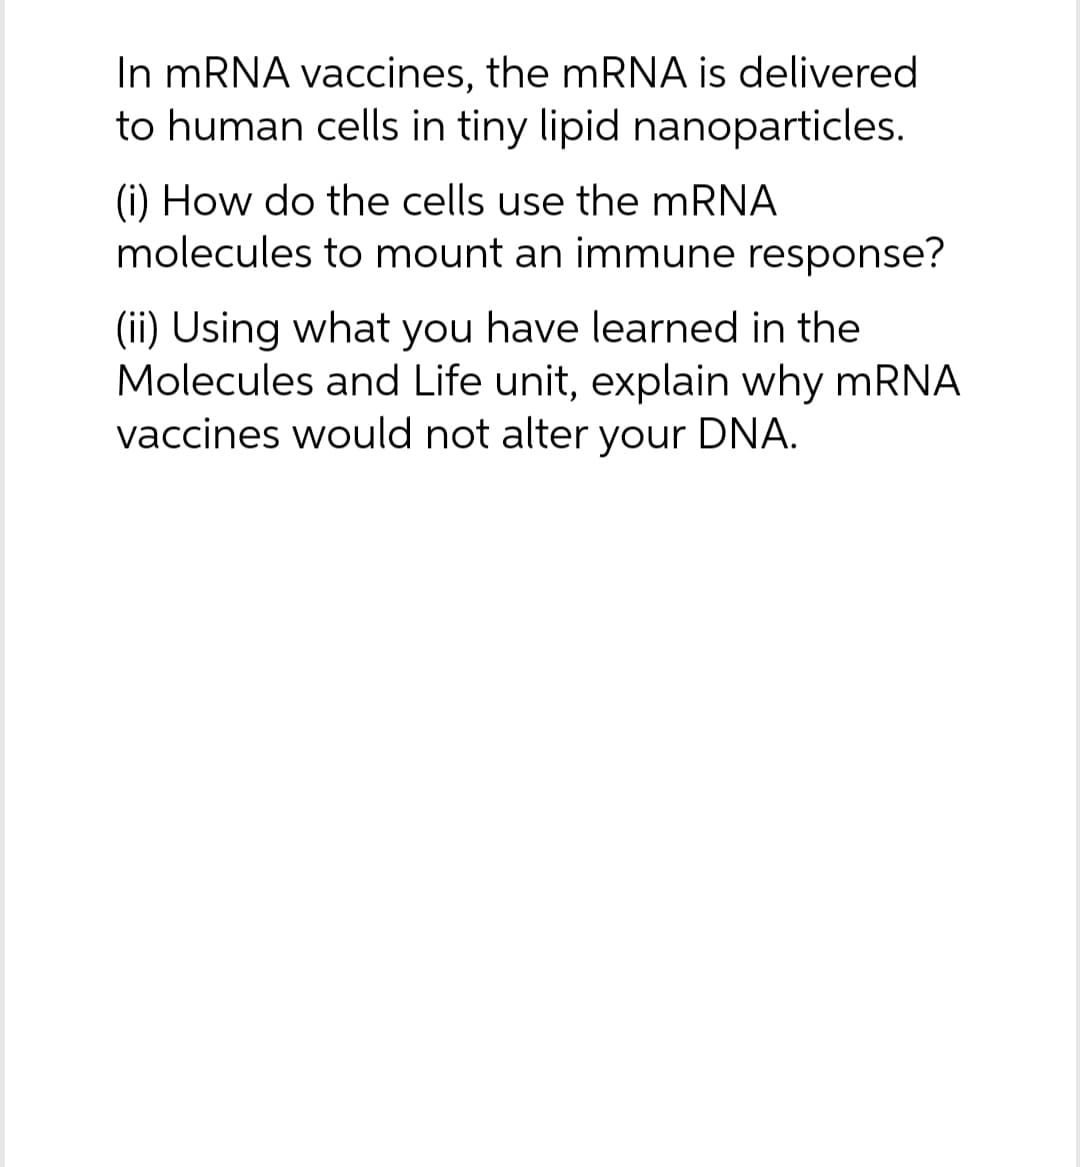 In mRNA vaccines, the MRNA is delivered
to human cells in tiny lipid nanoparticles.
(i) How do the cells use the mRNA
molecules to mount an immune response?
(ii) Using what you have learned in the
Molecules and Life unit, explain why mRNA
vaccines would not alter your DNA.
